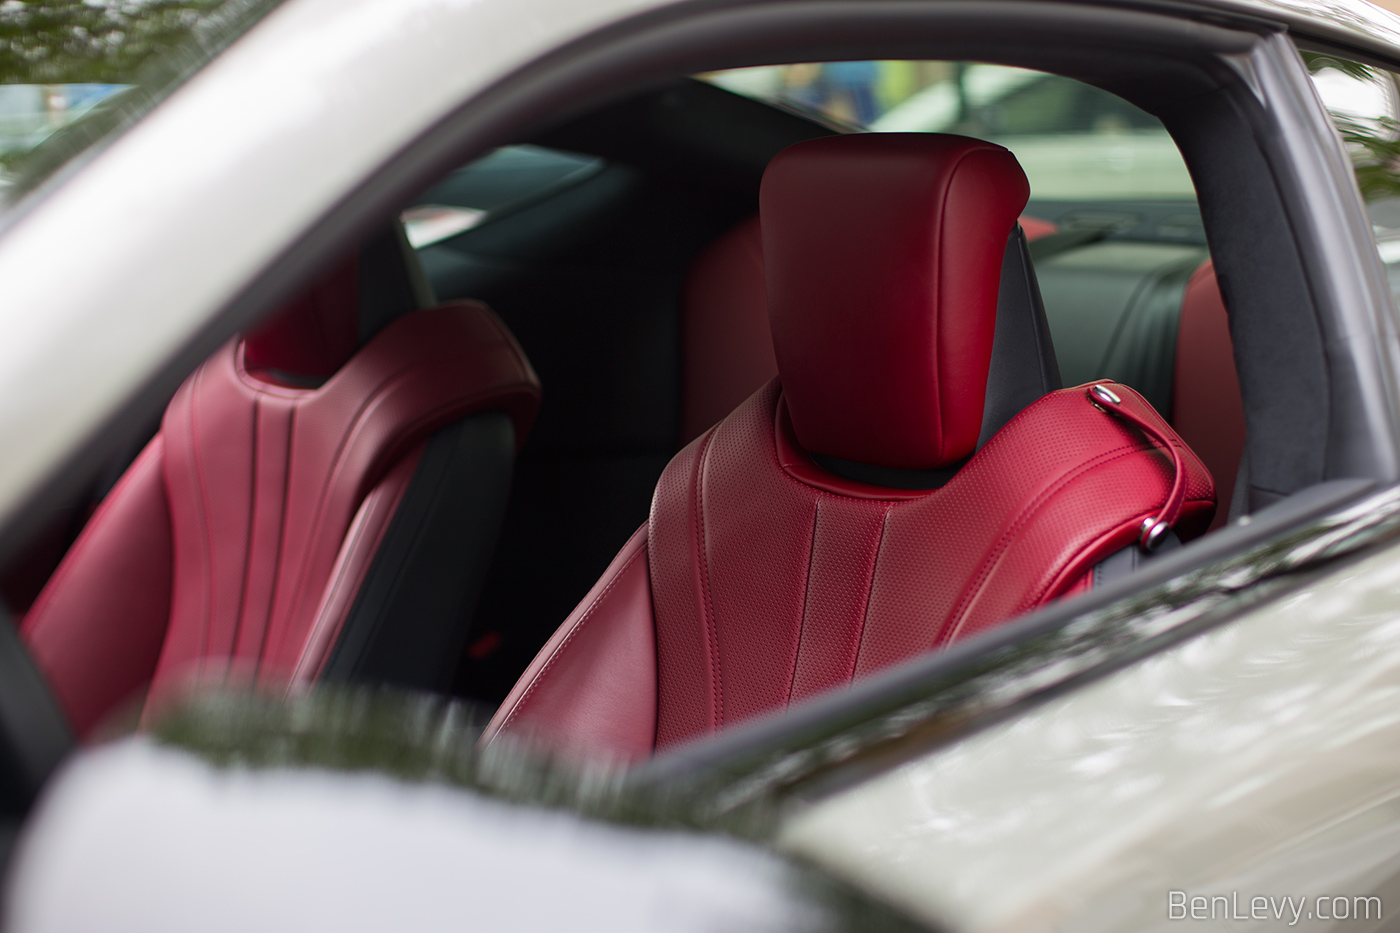 Lexus LC500 Seats with Red Leather